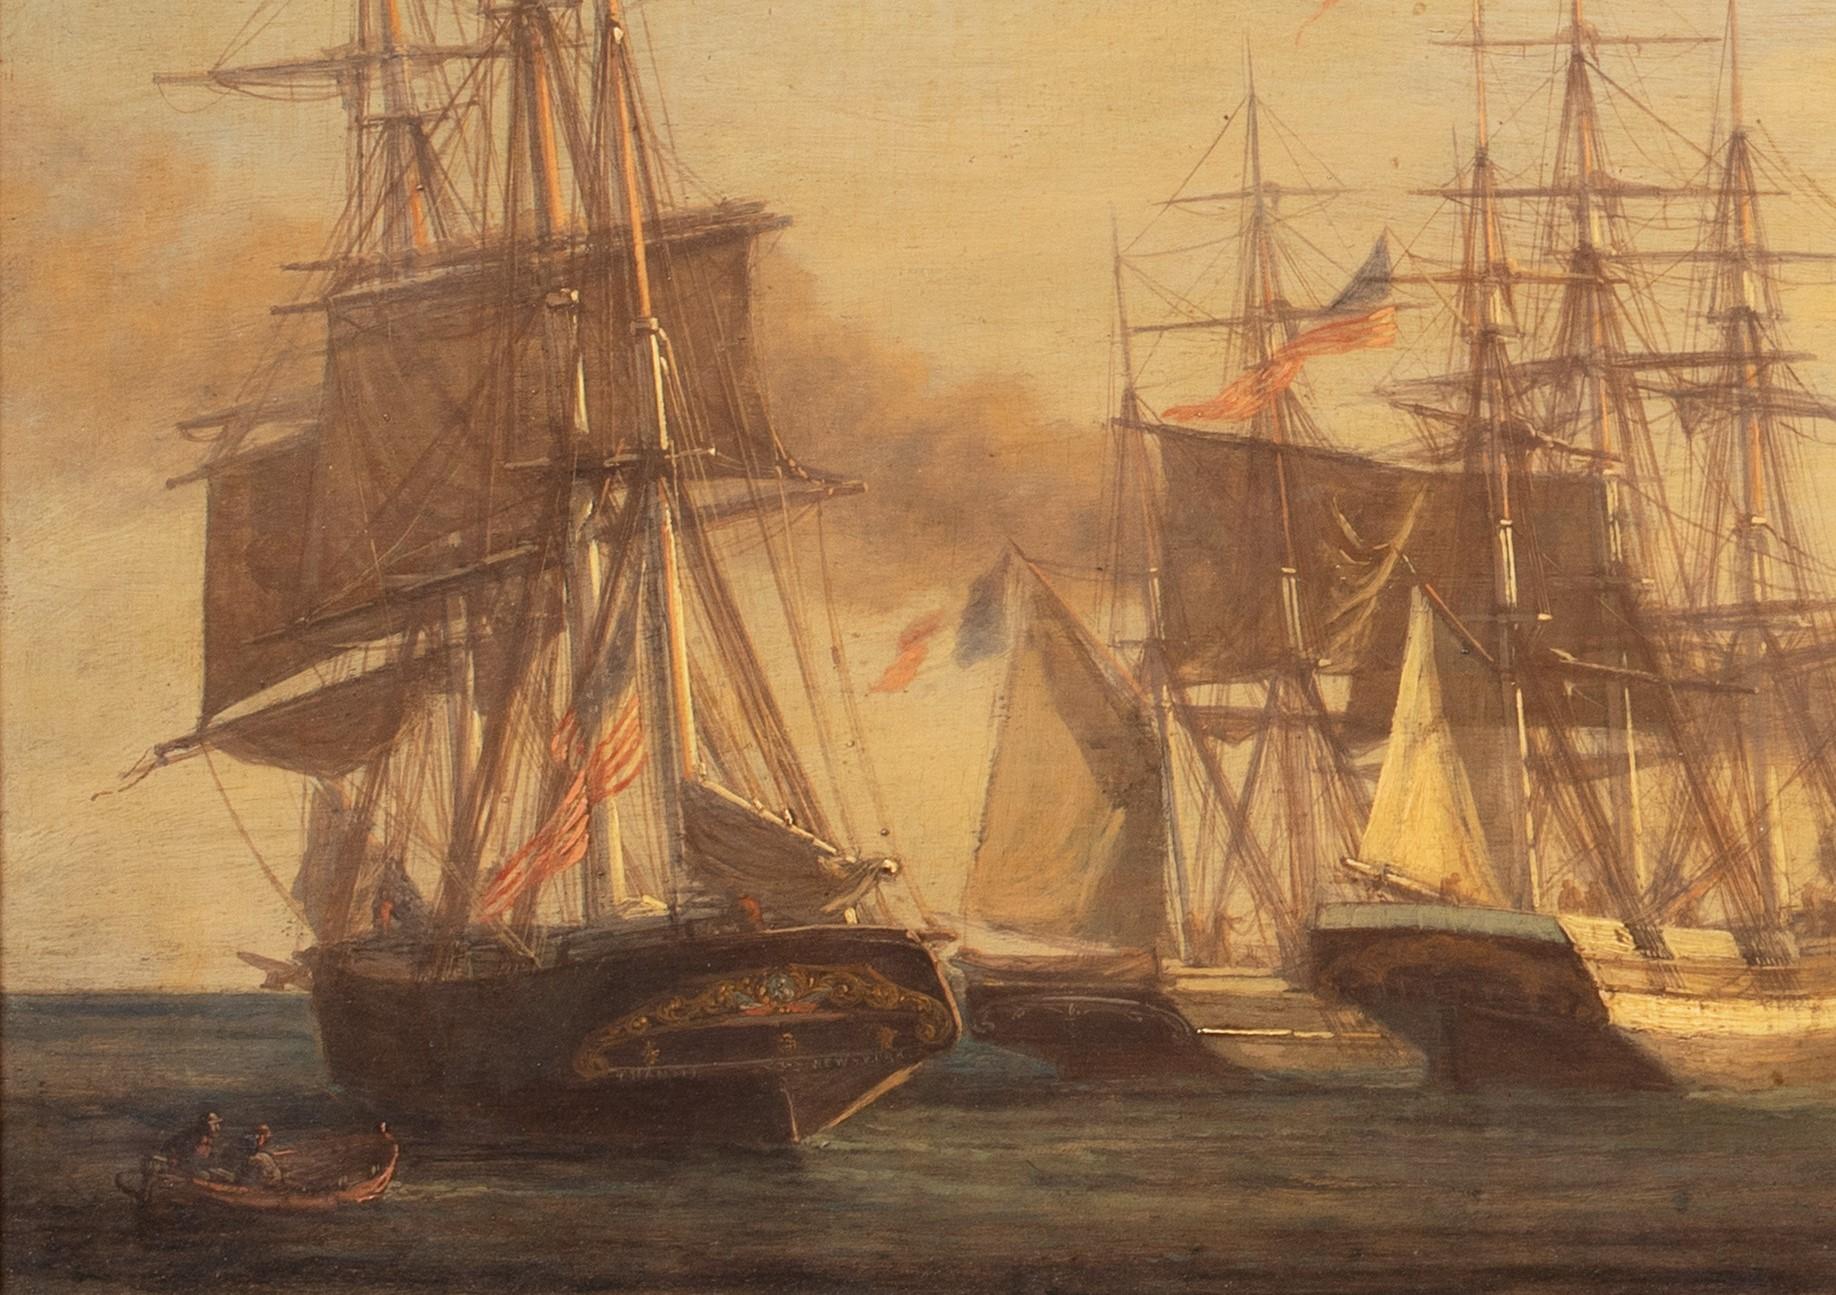 French & US Naval Battle, dated 1660

signed Boudin and Grisinelli

19th Century Naval scene with French and US ships, oil on canvas attributed to Eugene Boudin. Important early example of the artists work from a period of 1850-60 where he produced